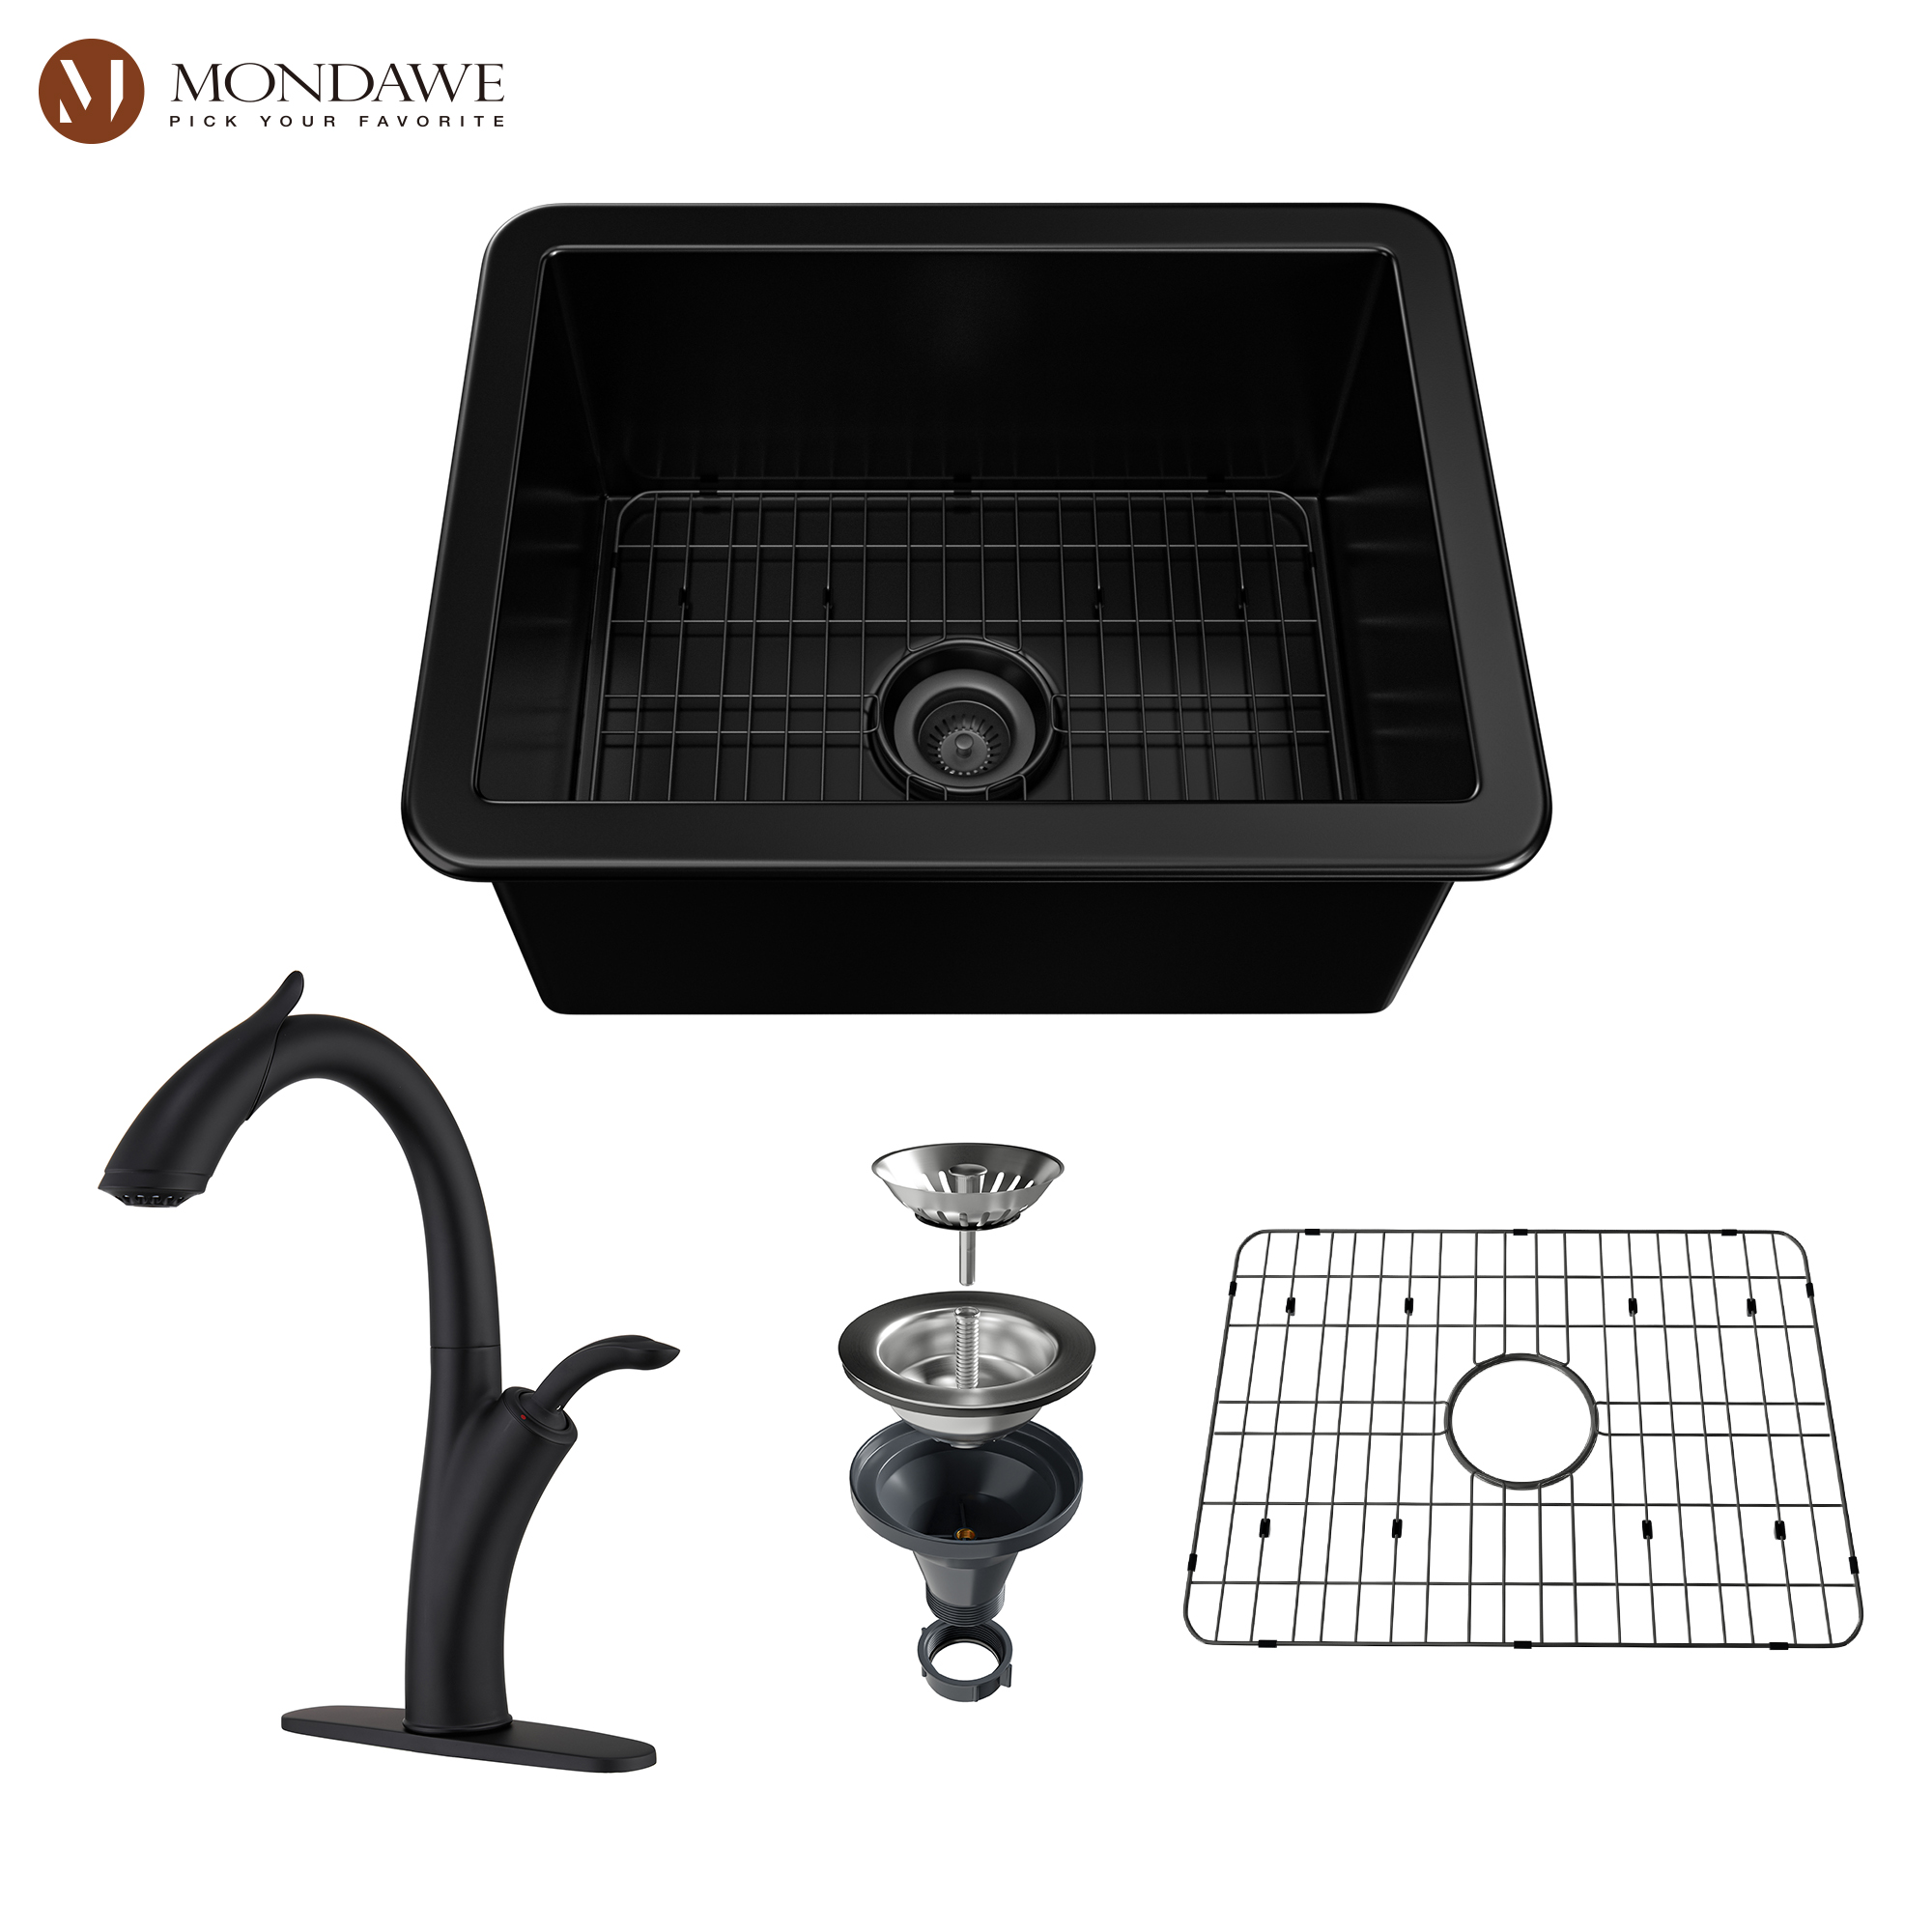 Undermount 24 In. Matte Black Single Bowl Fireclay Kitchen Sink Comes With Pull Down Kitchen Faucet-Mondawe